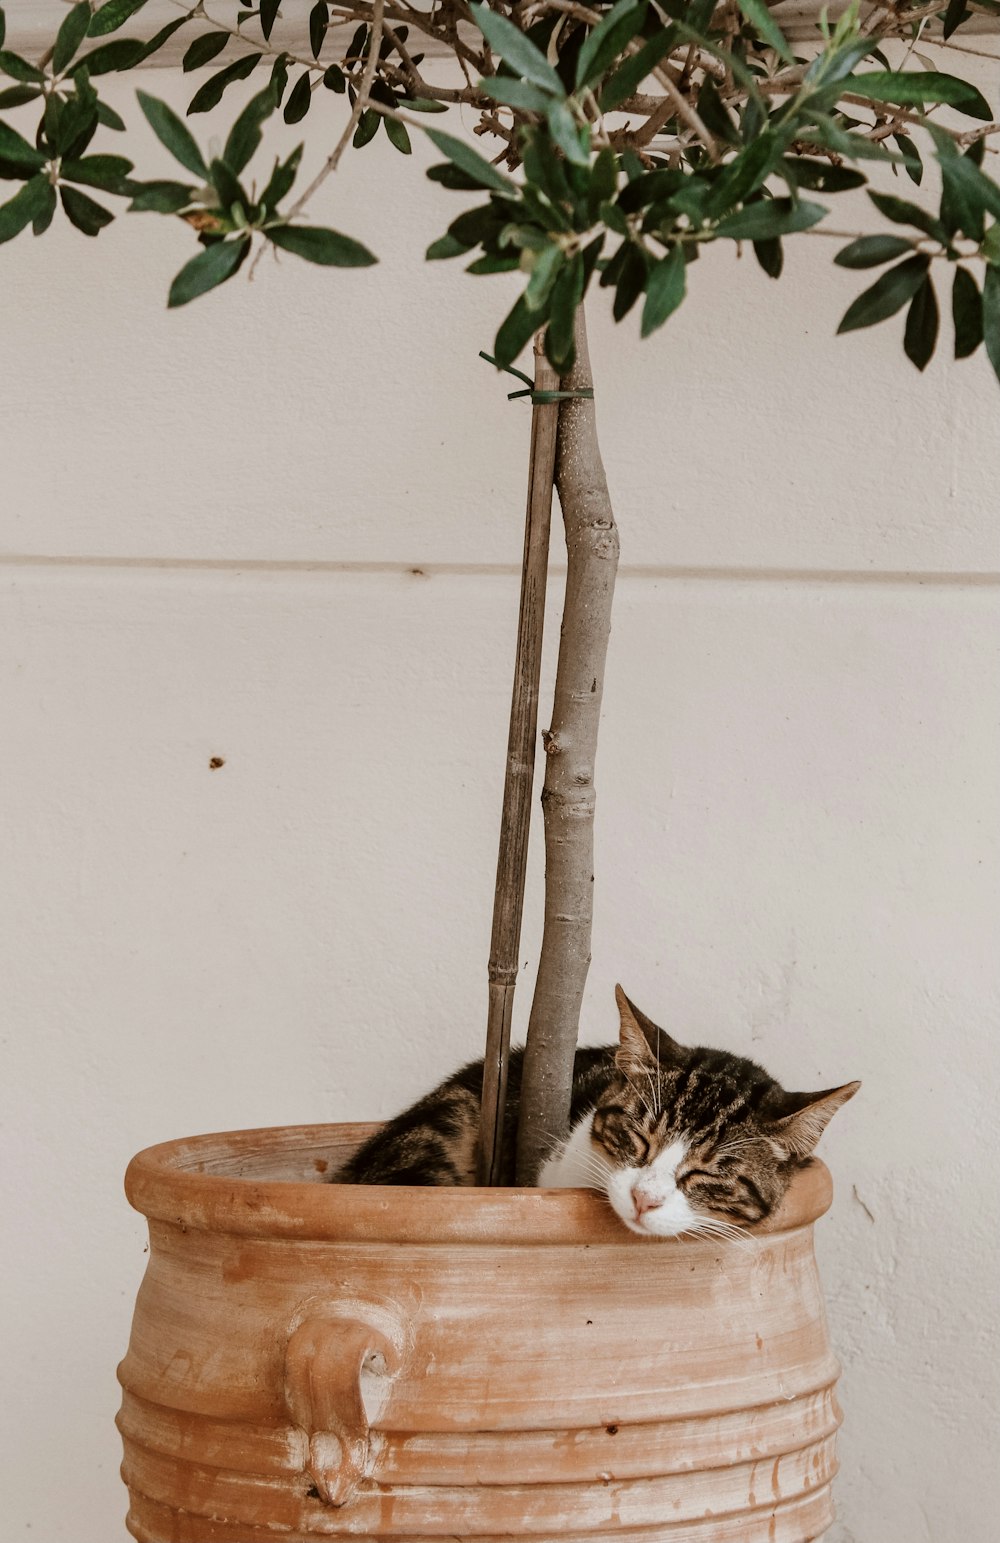 brown tabby cat on brown wooden pot